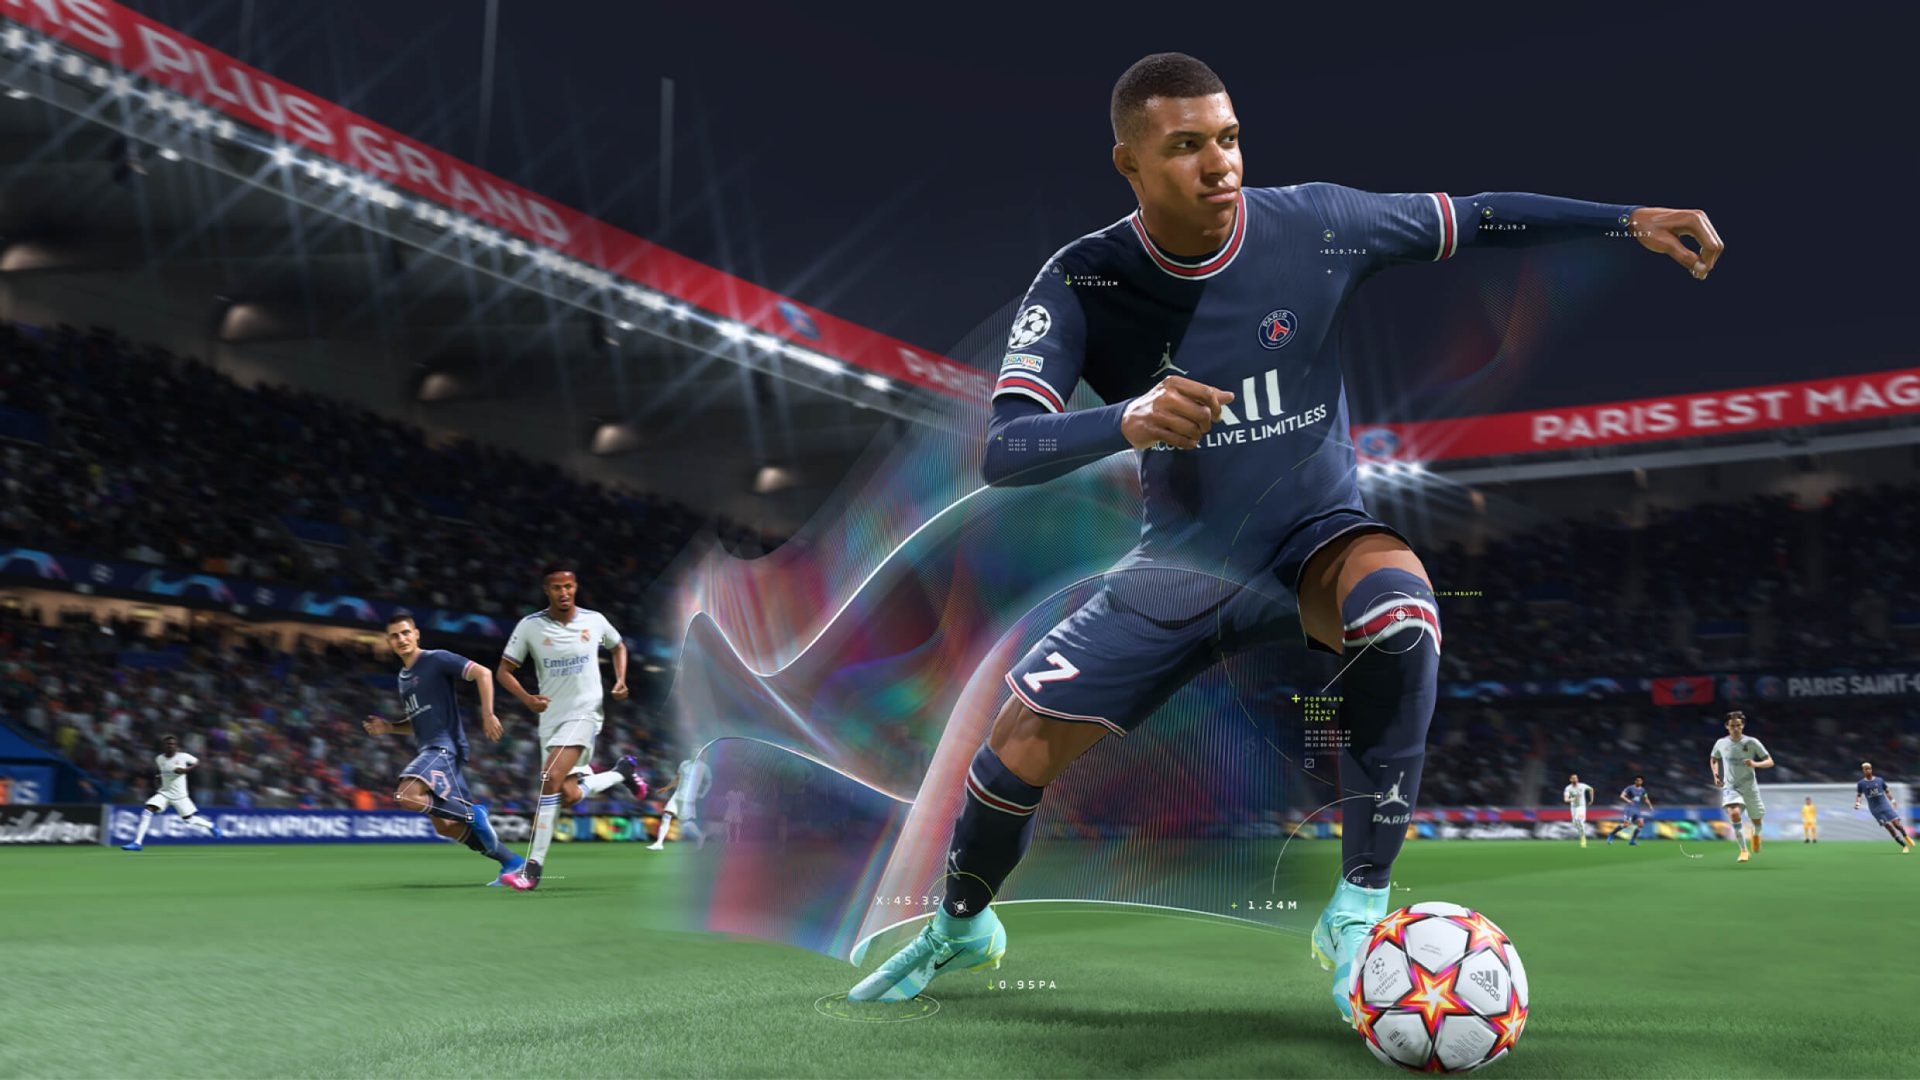 FIFA Soccer (Game): The evolution of the football simulation series, The 29th installment. 1920x1080 Full HD Wallpaper.